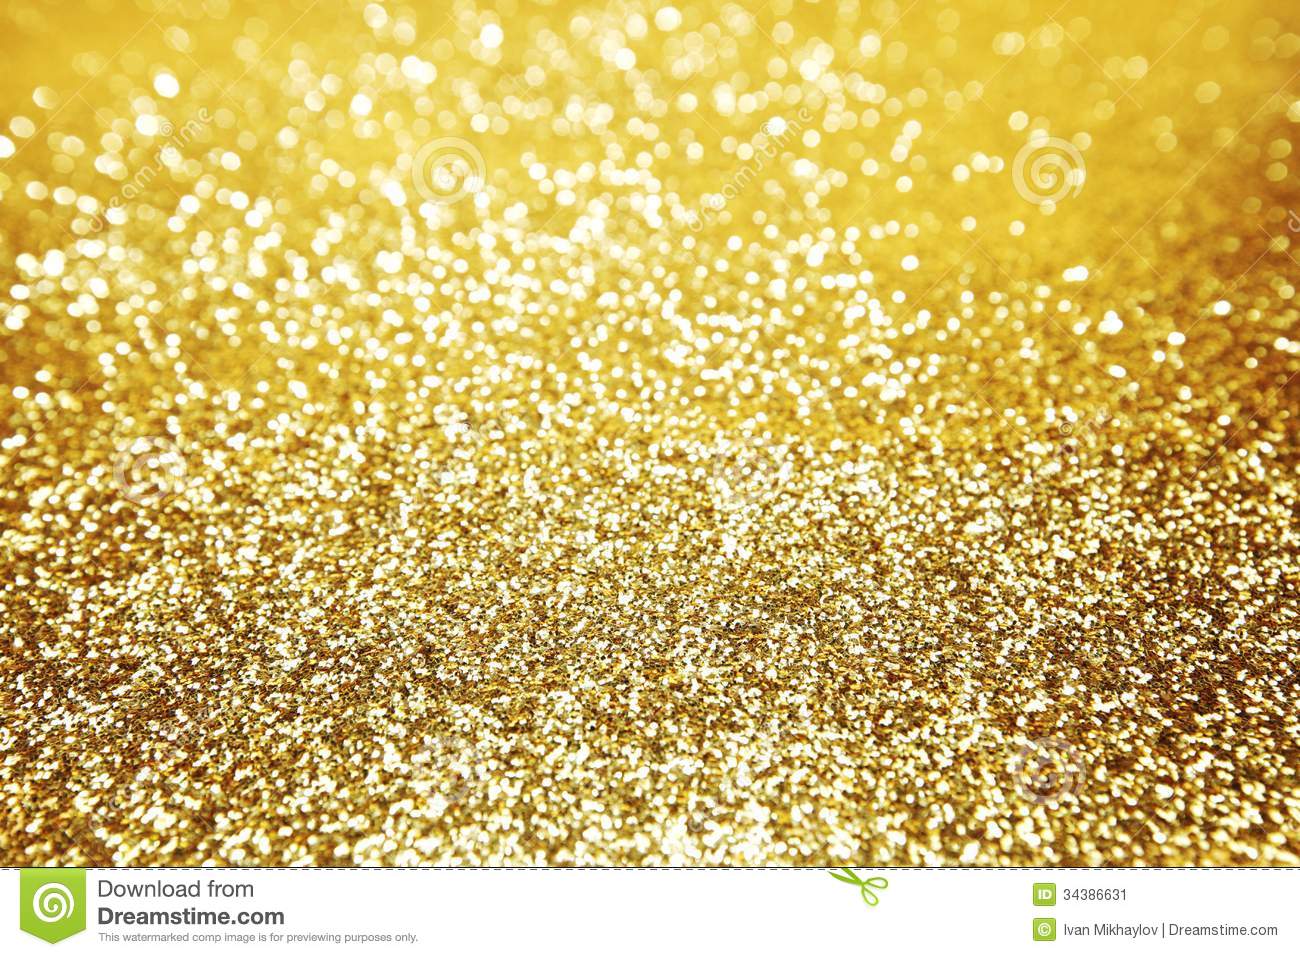 Gold Glitter Background Related Keywords amp Suggestions